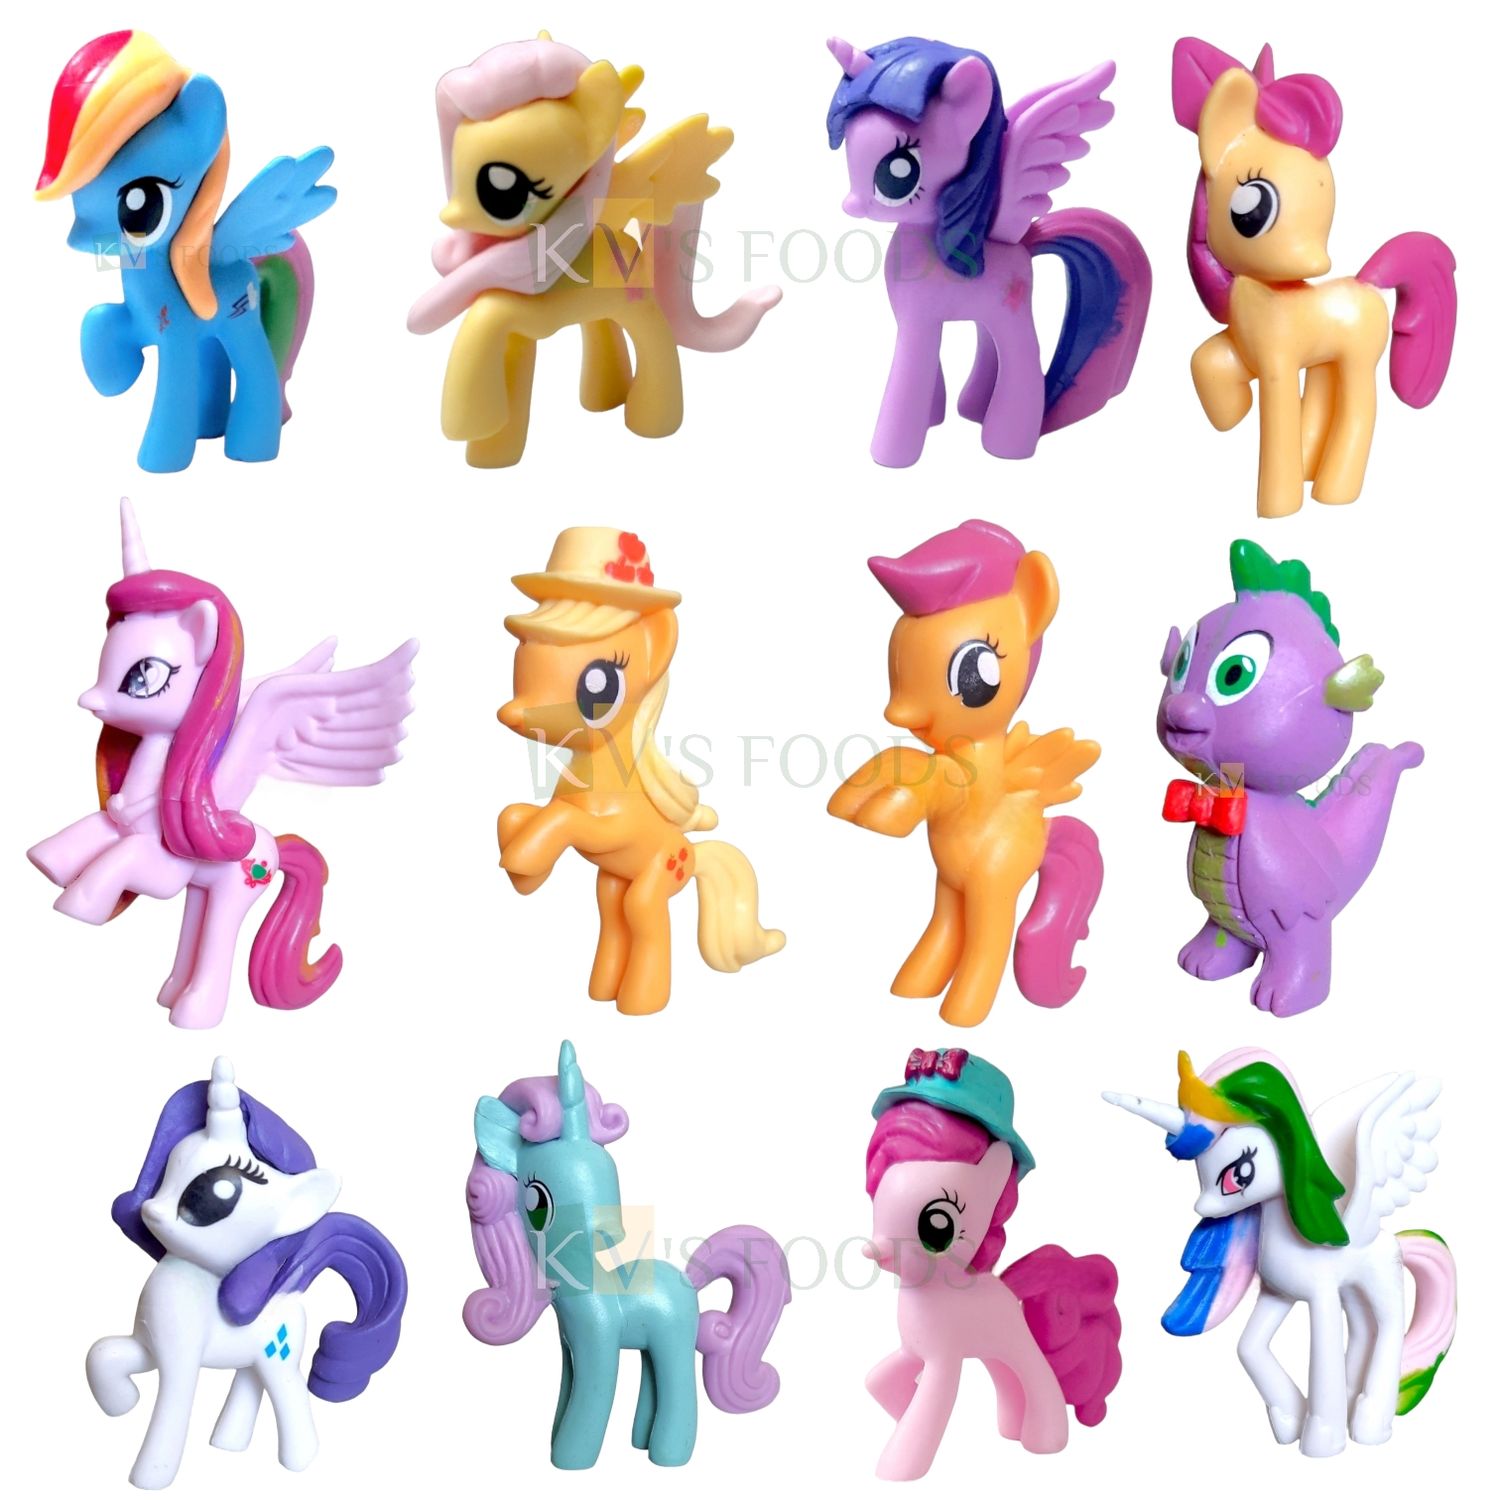 12PCS Length 1.7 to 2.5 Inch, Twilight Sparkle, Rainbow Dash, Princess Cadance, Scootaloo, Apple Bloom, Spike, Big Different My Little Pony Frienship is Magic Miniature Cartoon Characters Cake Toppers